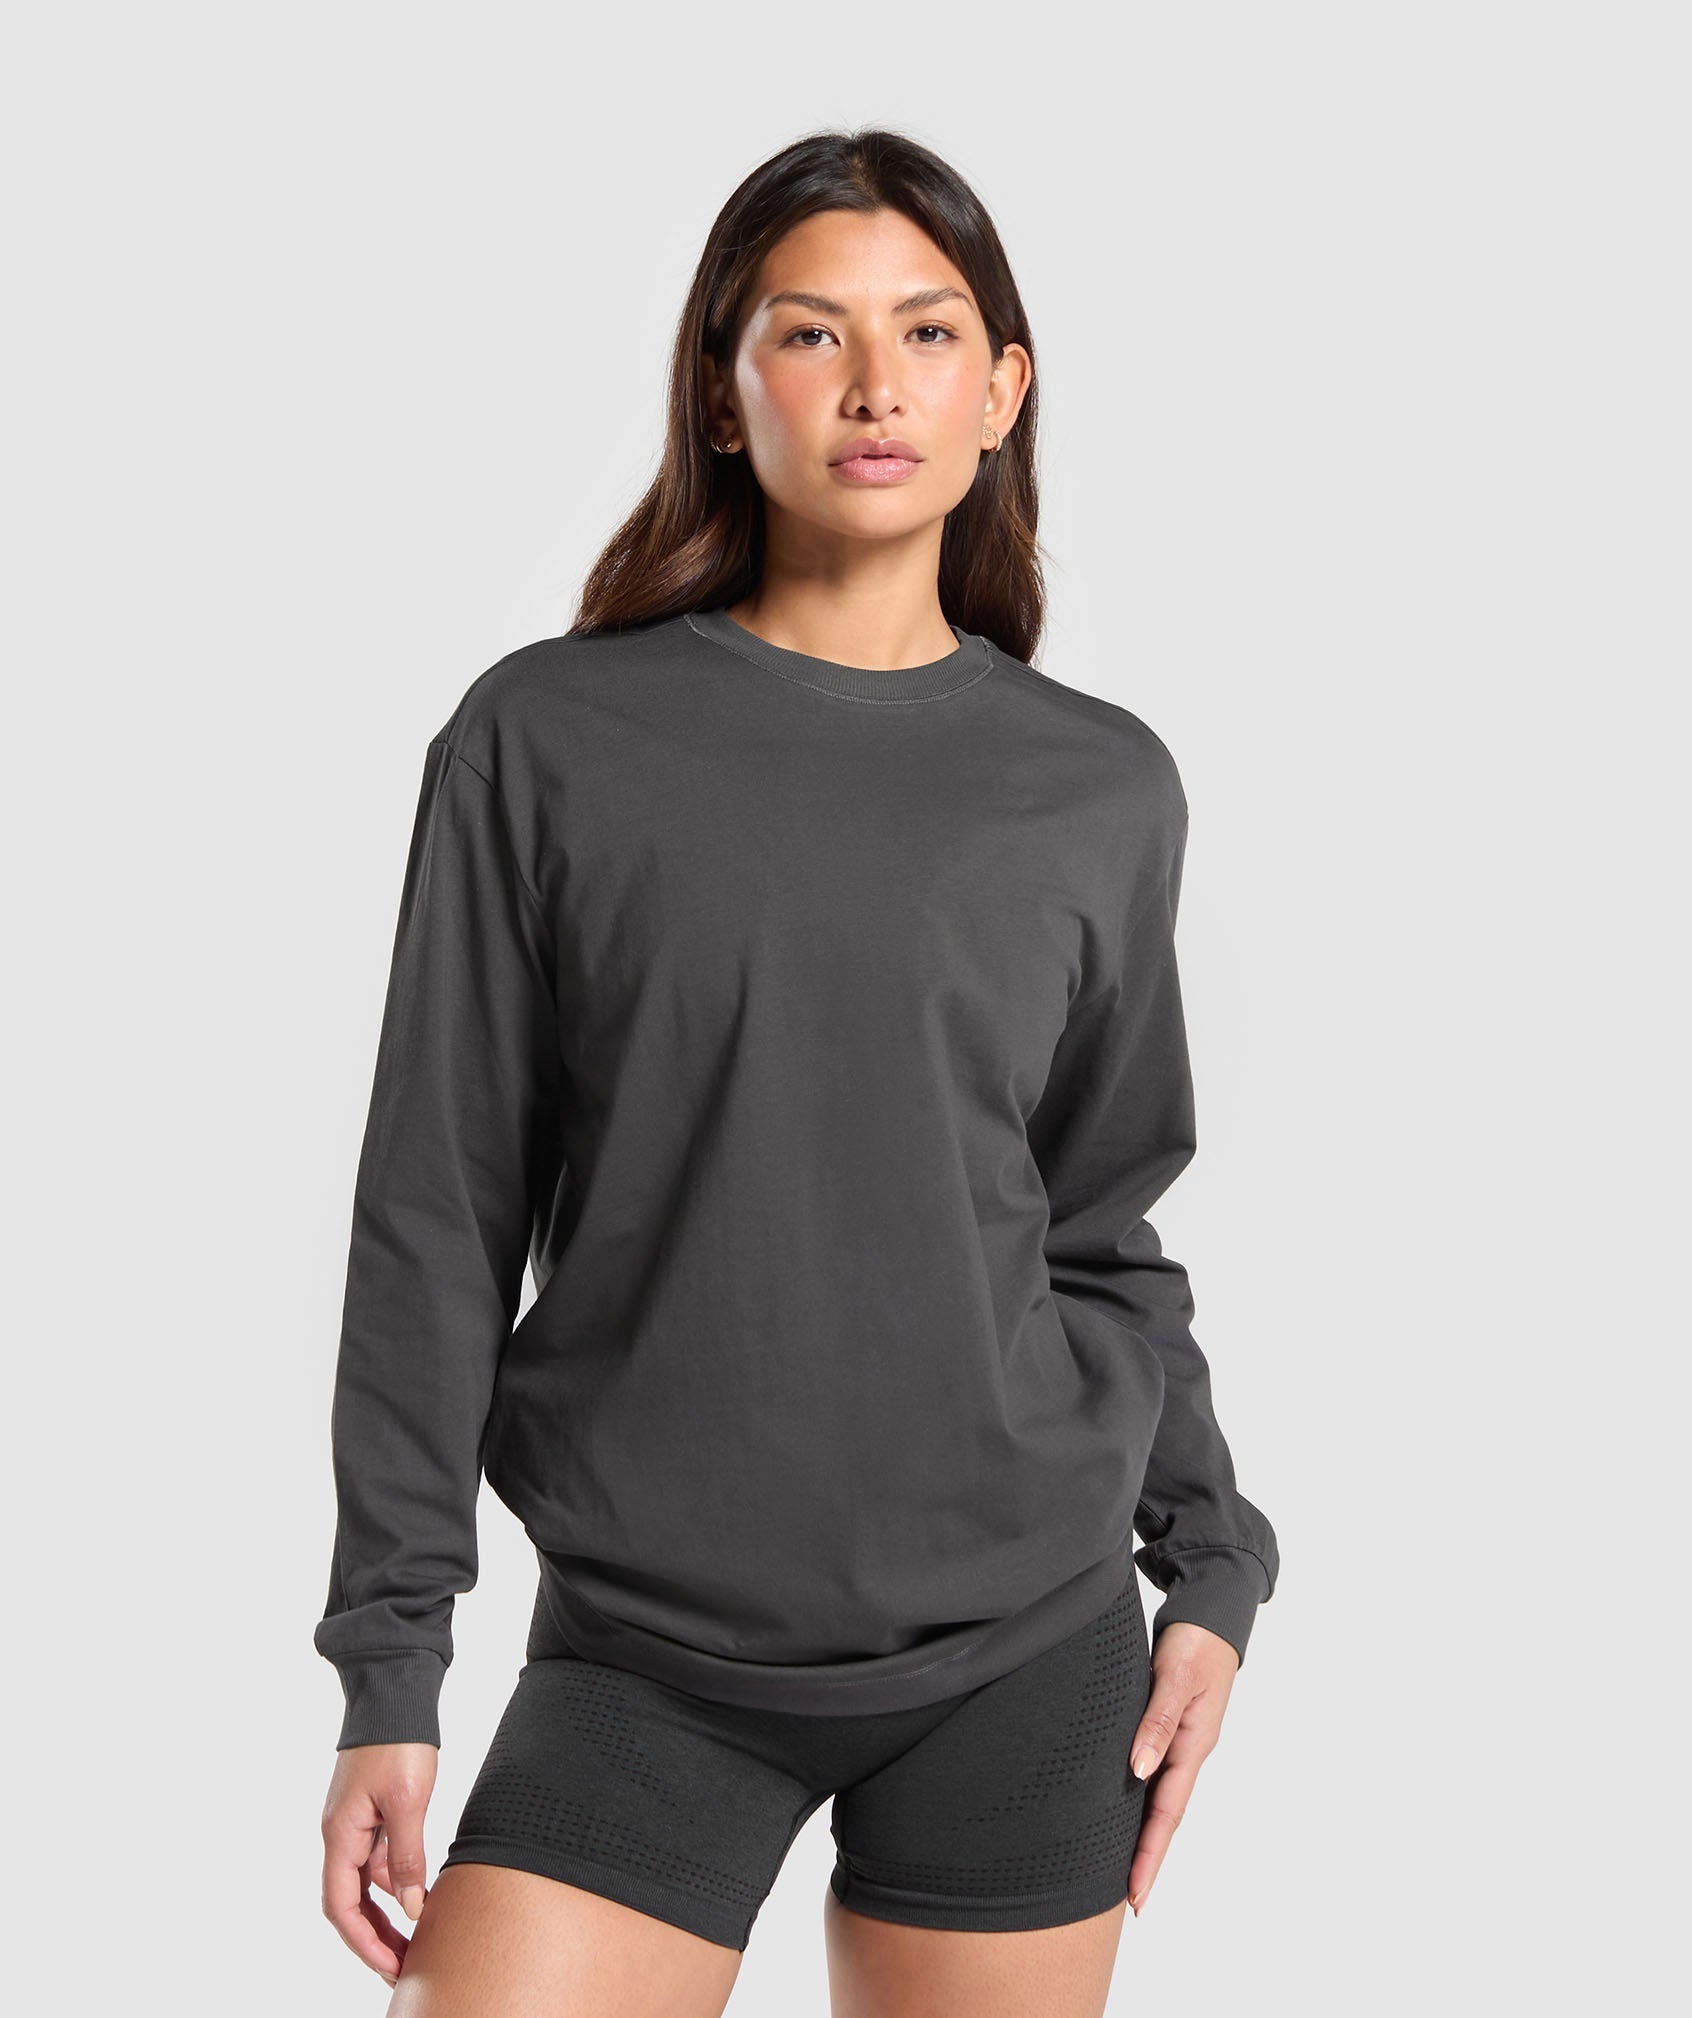 Cotton Oversized Long Sleeve Top in Onyx Grey